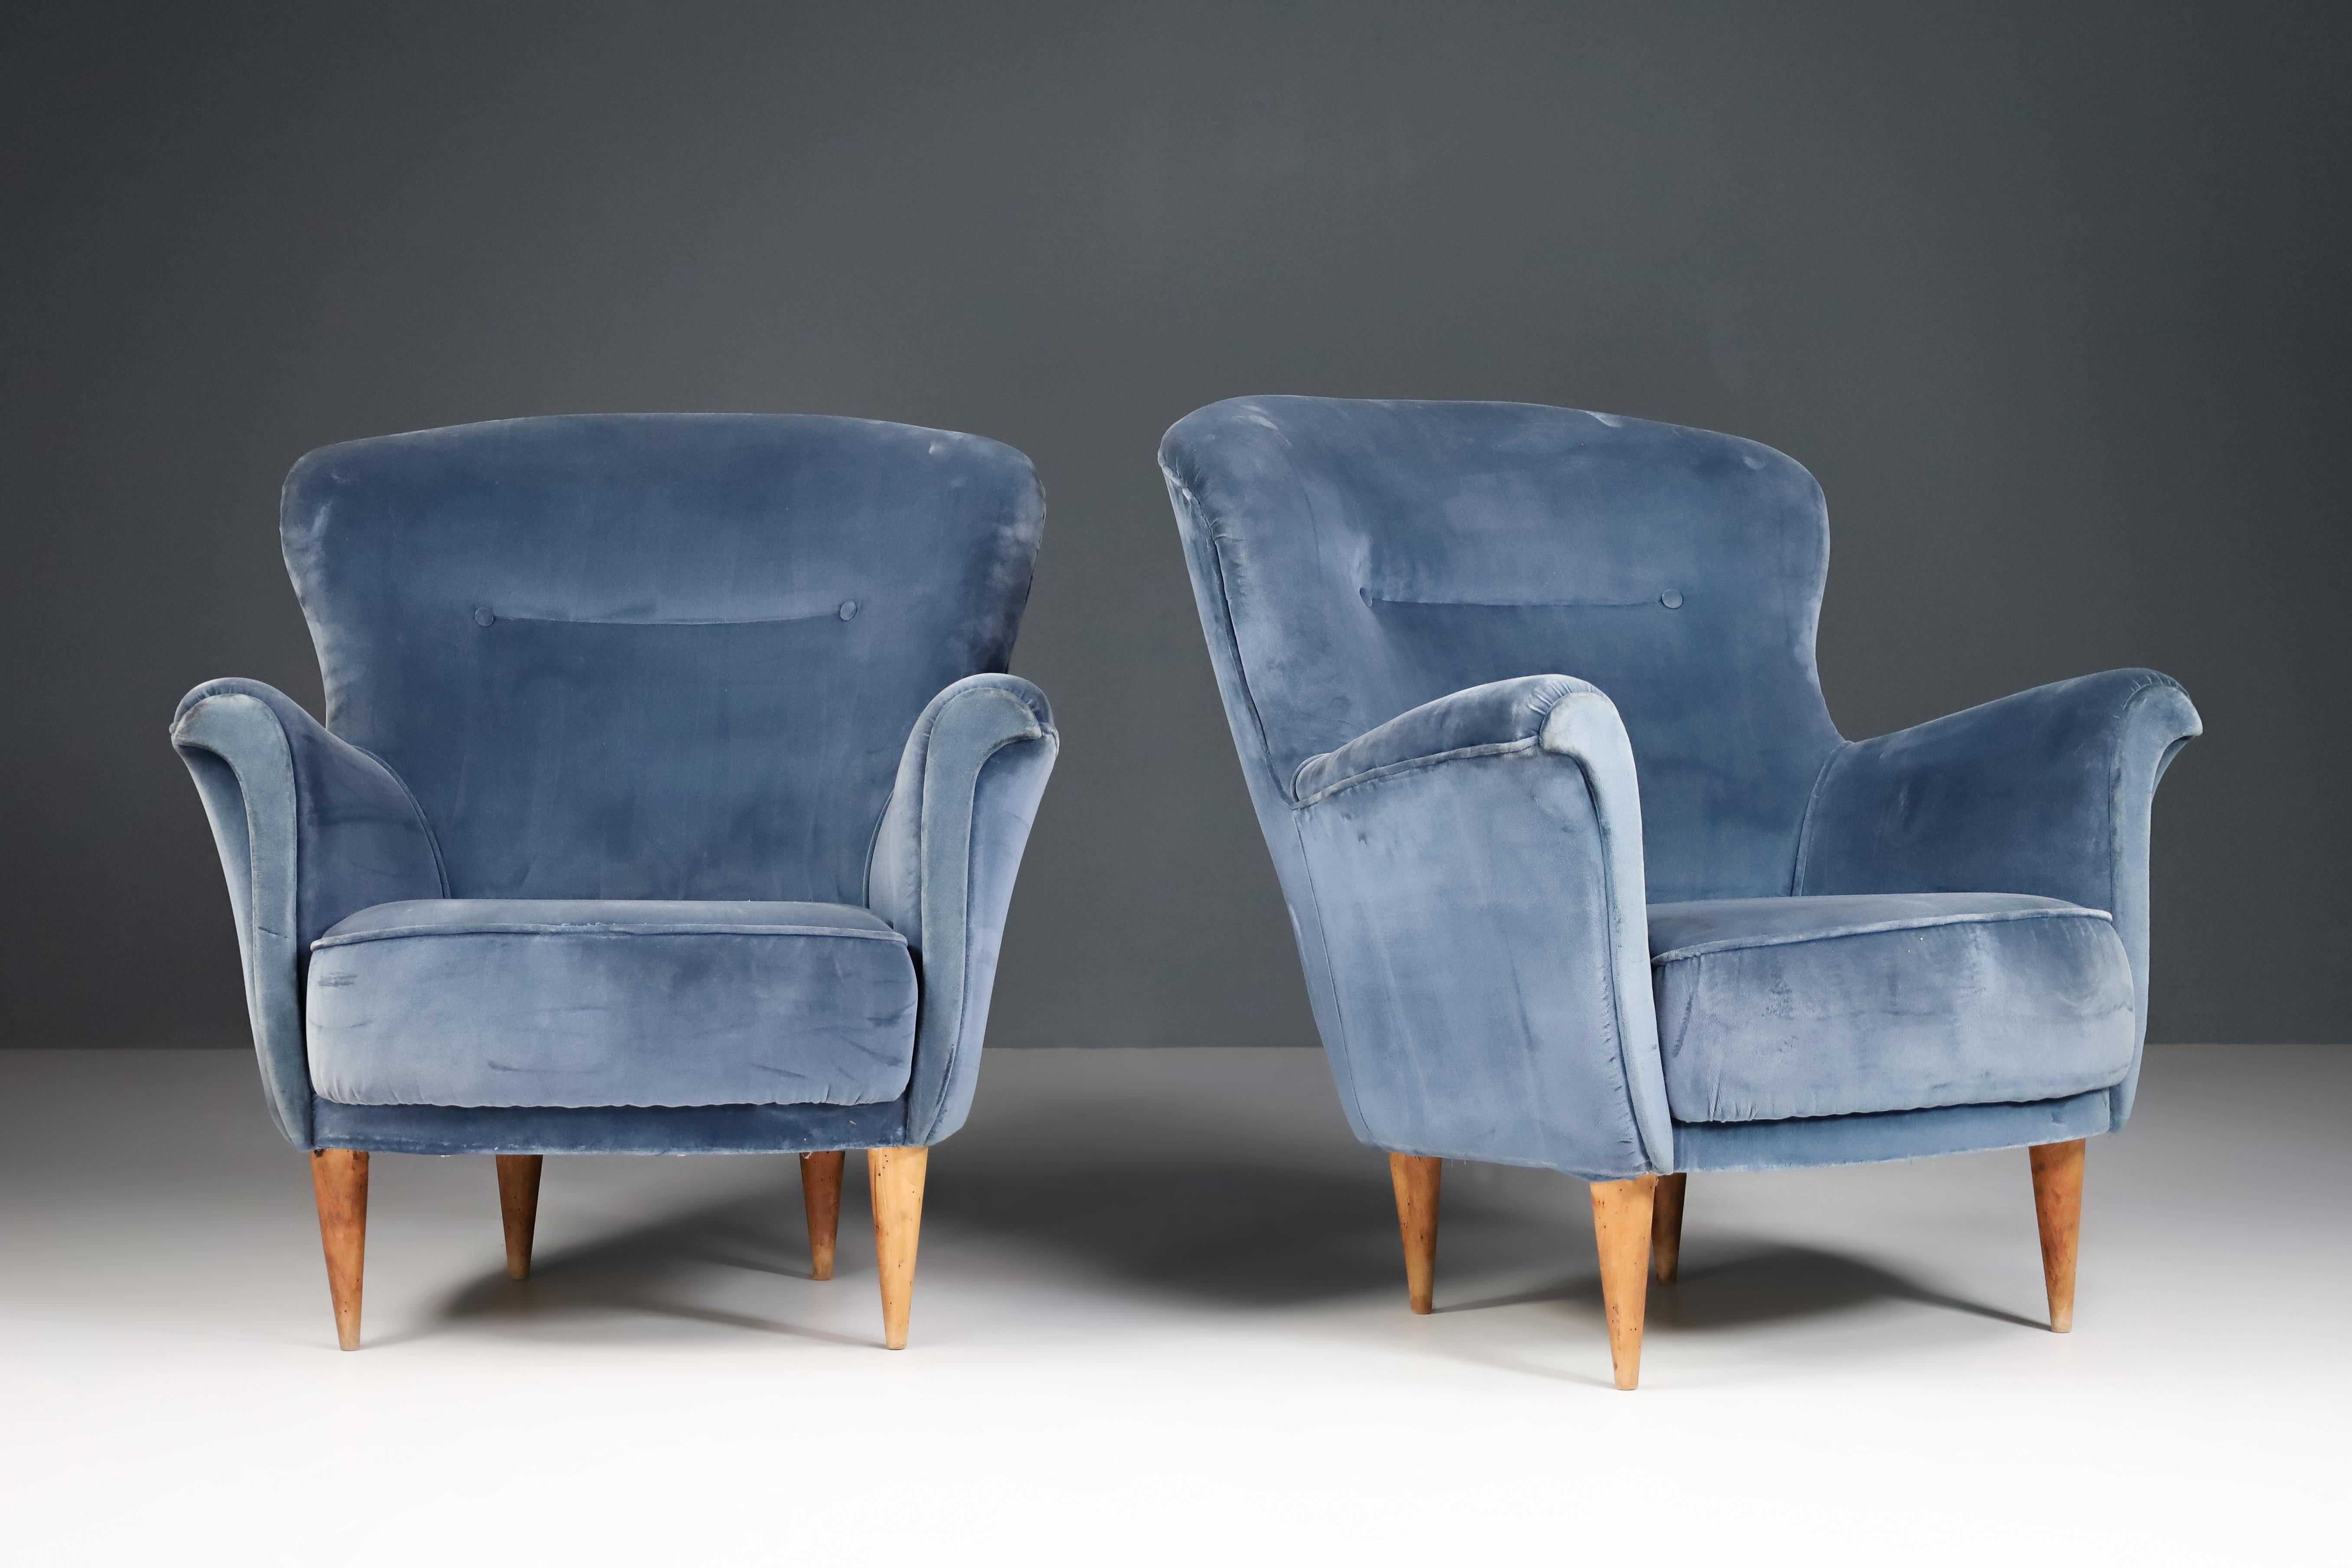 Armchairs with Tapered Wooden Legs attributed Cesare Lacca, Italy, the 1950s.

Pairing two luxury armchairs with tapered wooden legs in original blue upholstery was attributed to Cesare Lacca, Italy, in the 1950s and designed by the famous Cesare